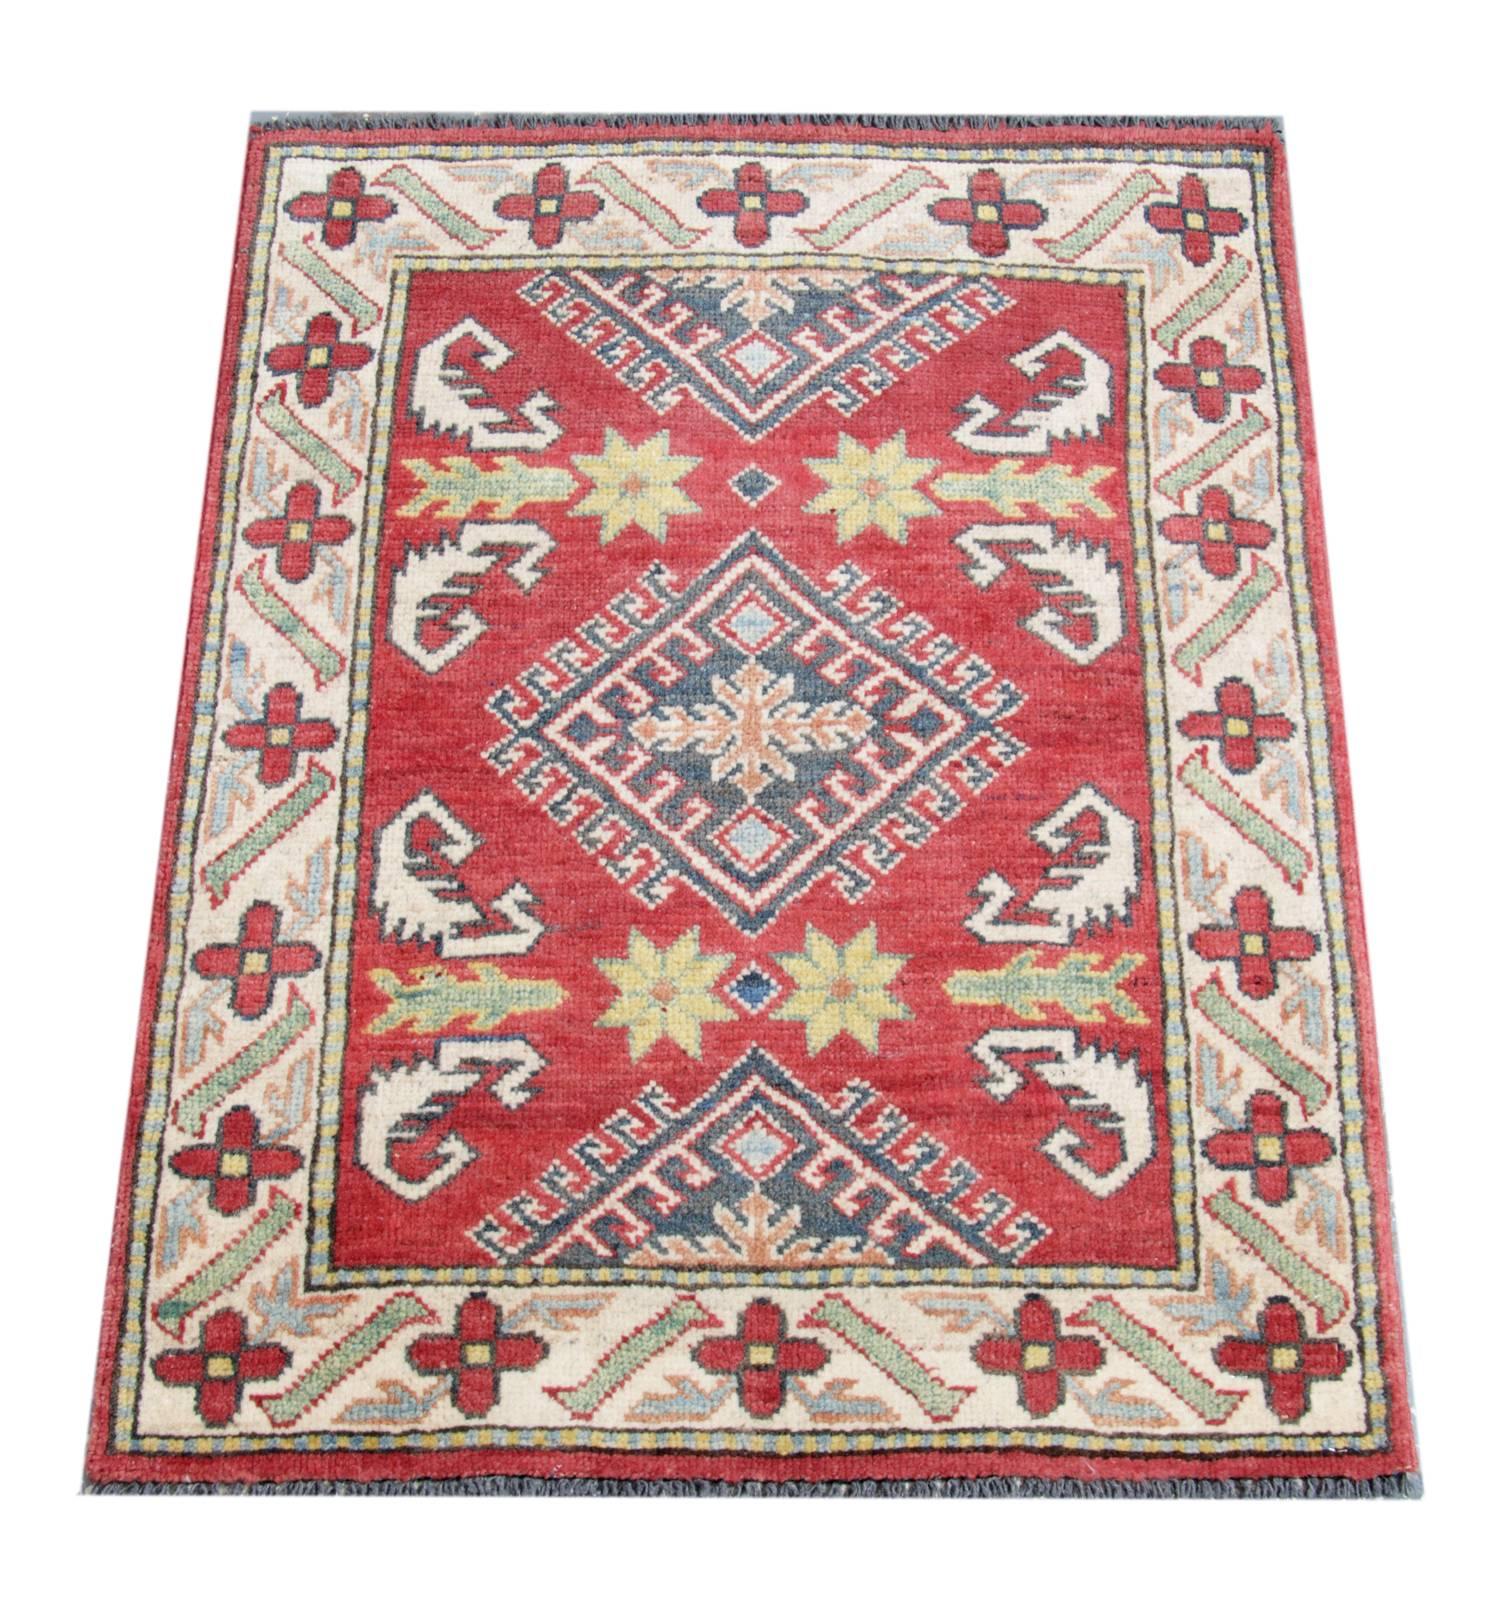 This new traditional handwoven rug is featuring designs from the Kazak region. Traditional rugs are making the region of Afghanistan. This floral rug has been made by Afghan weavers of top quality wool and cotton.  This oriental rug there are